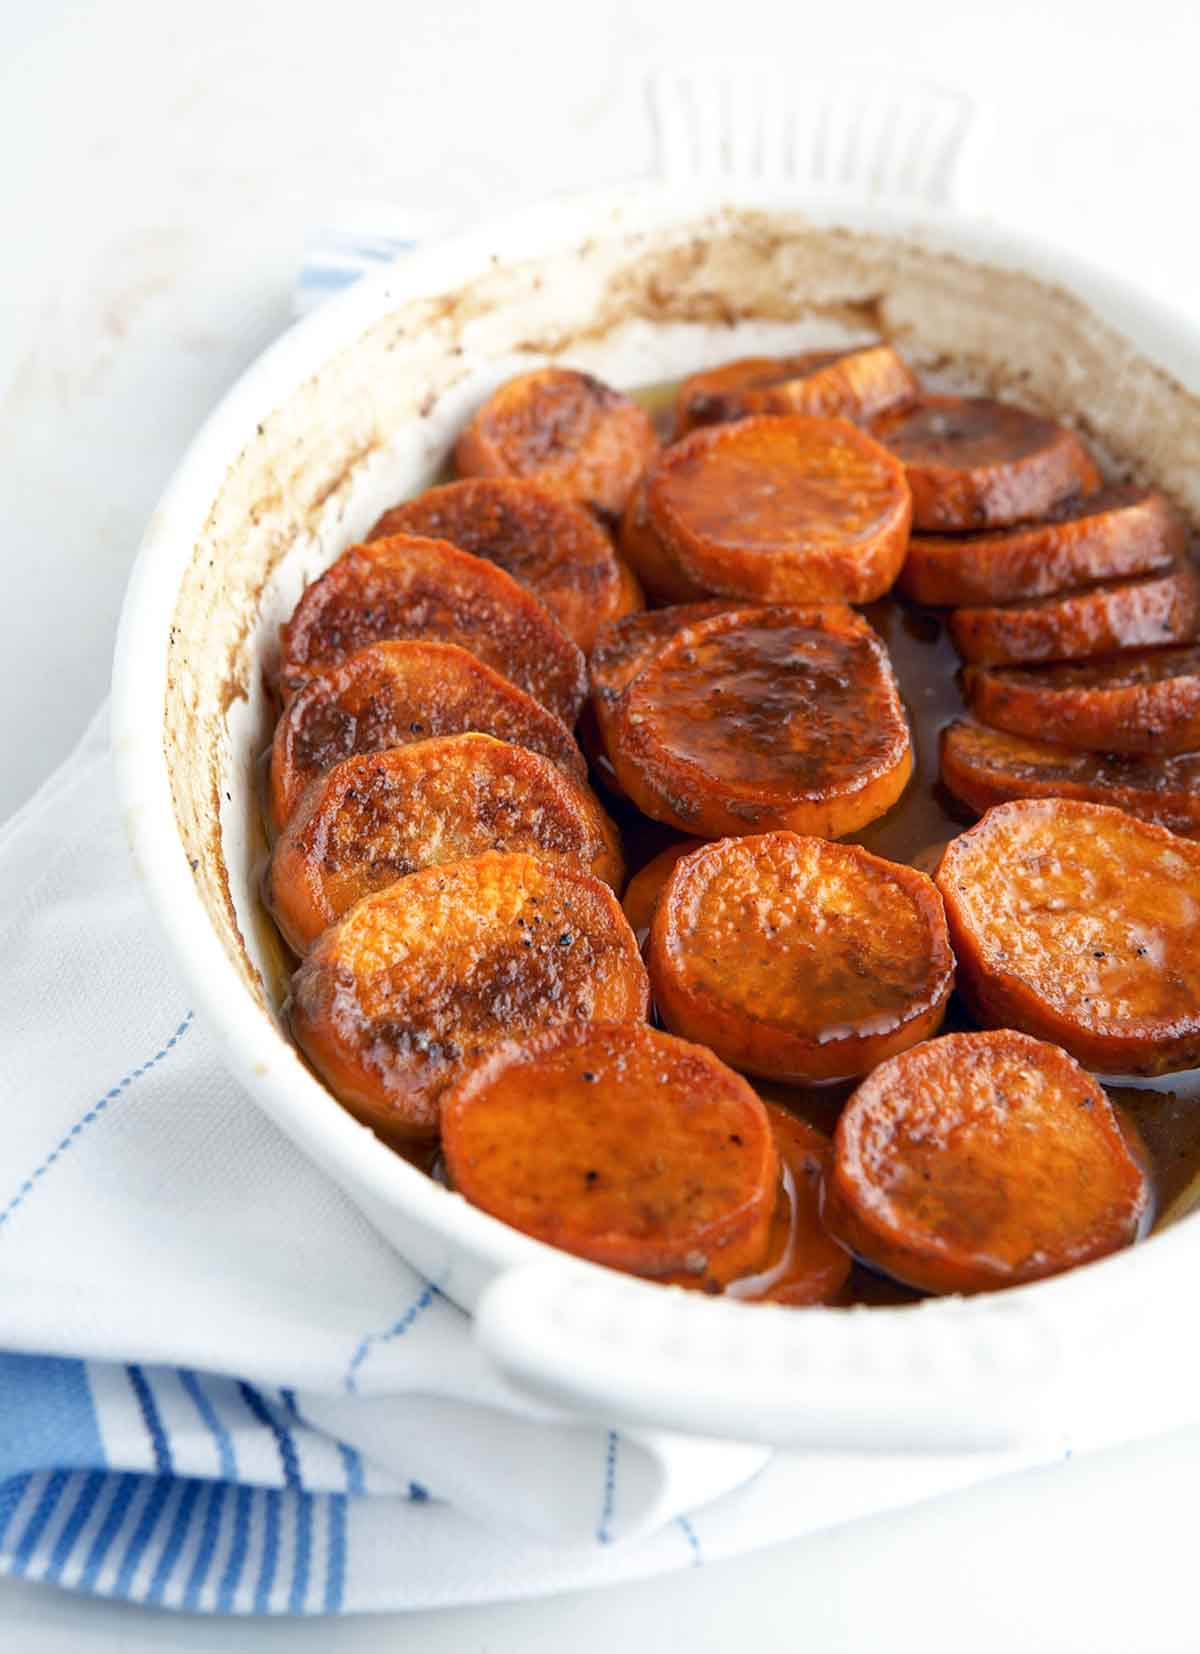 A white oval dish filled with slices of roasted sweet potato in a bourbon syrup.